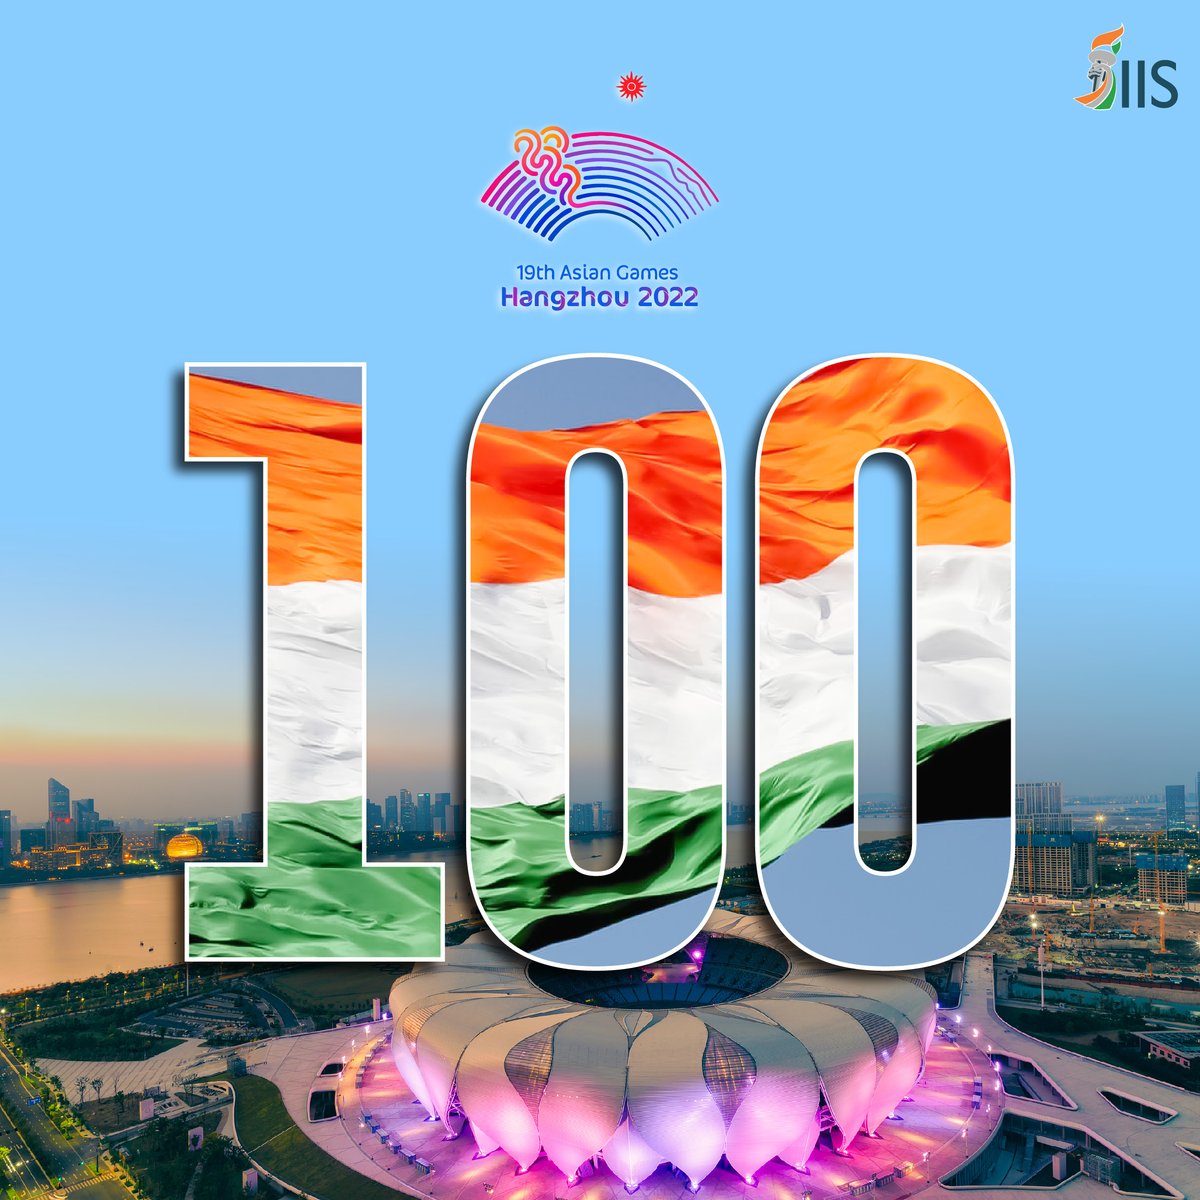 𝐀 𝐇𝐈𝐒𝐓𝐎𝐑𝐈𝐂 𝐇𝐔𝐍𝐃𝐑𝐄𝐃! 🇮🇳💯

Congratulations to #TeamIndia at the #AsianGames in Hangzhou for breaking the record and HOW! 

#CraftingVictories #IISxAsianGames